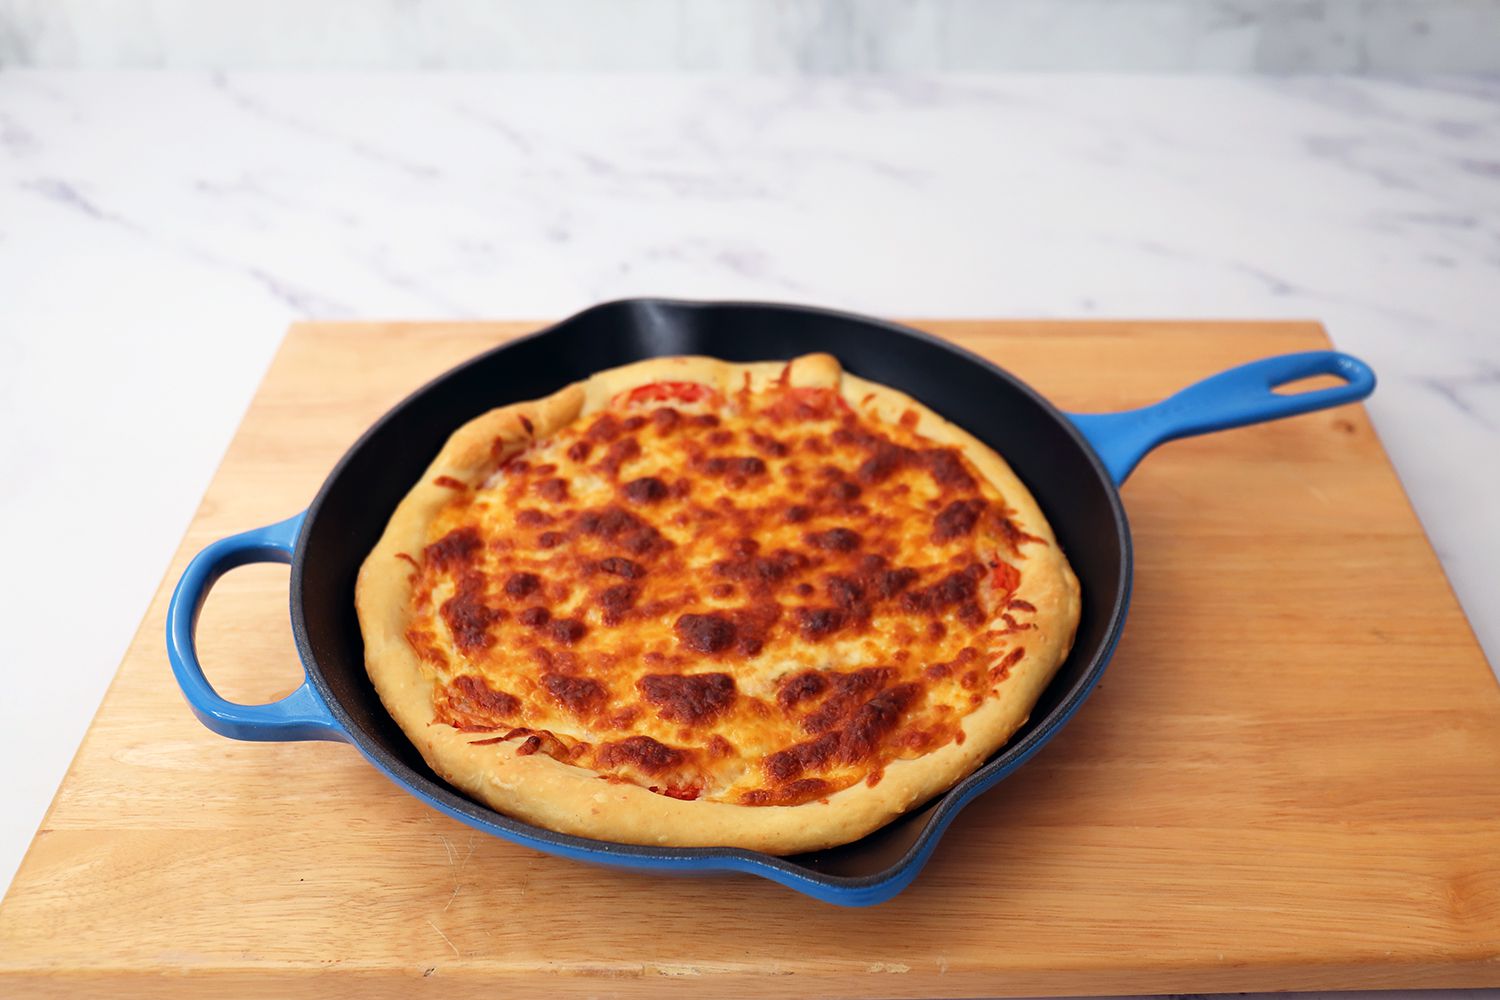 Le Creuset Signature Skillet with pizza cooked inside on a wooden cutting board